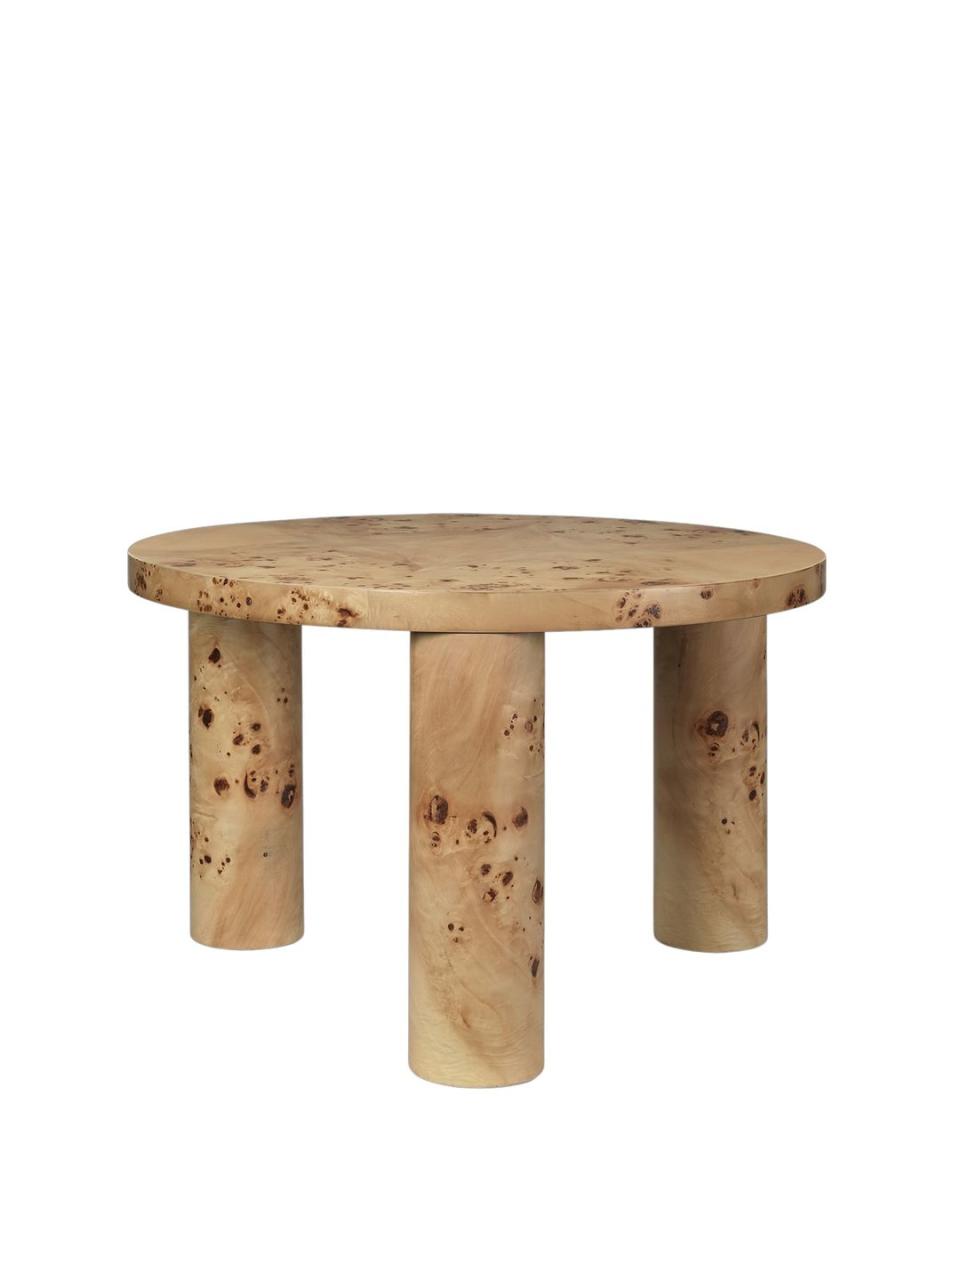 a burr wood coffee table with three legs